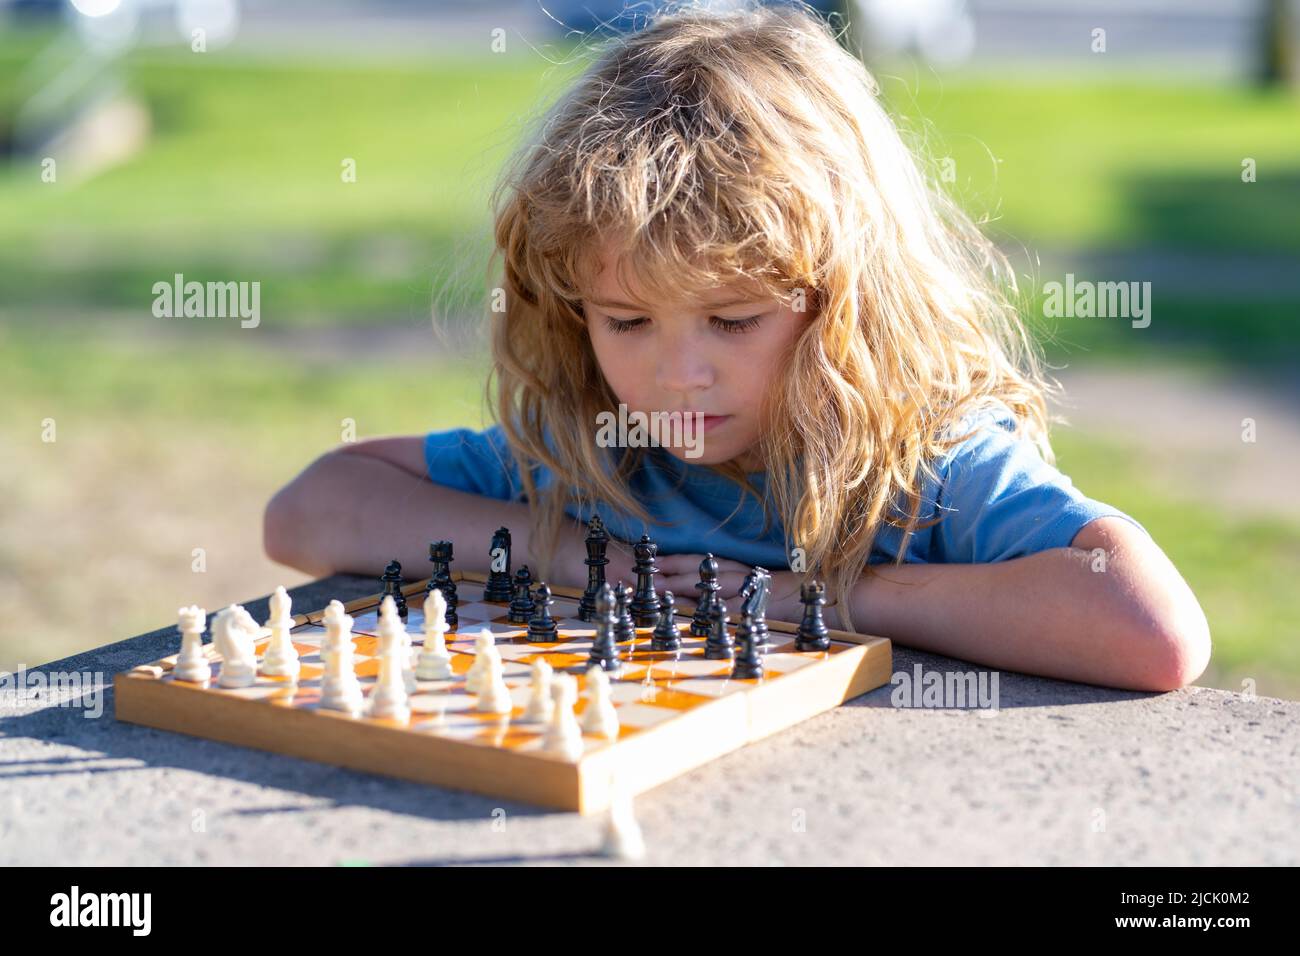 next move in a chess game, Stock image